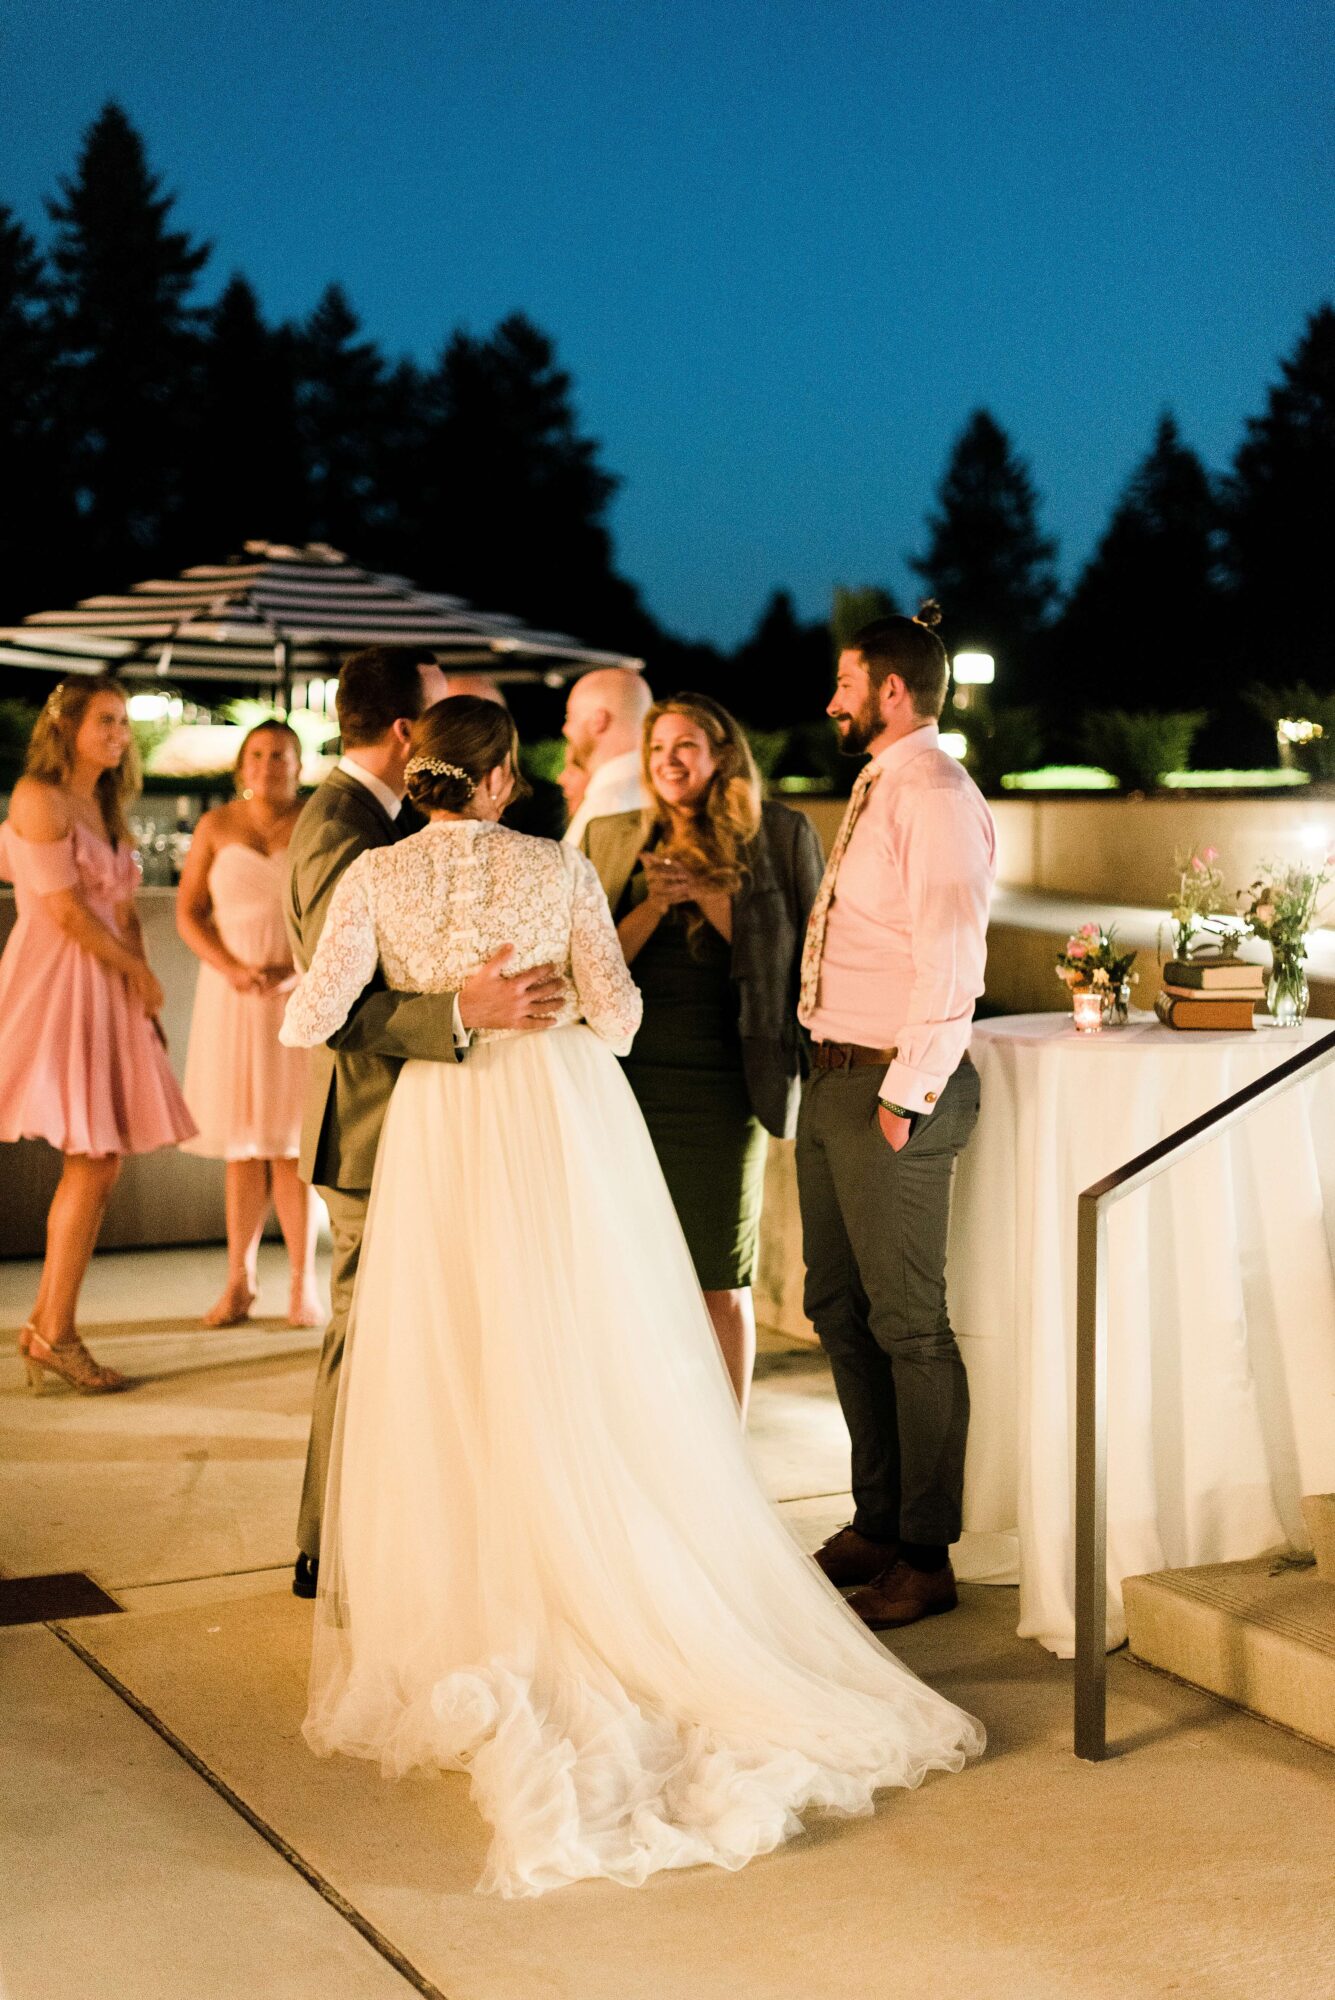 Stylish reception dinner at sunset at the Lodge at St. Edward Park Wedding in Kenmore, Washington, outside Seattle